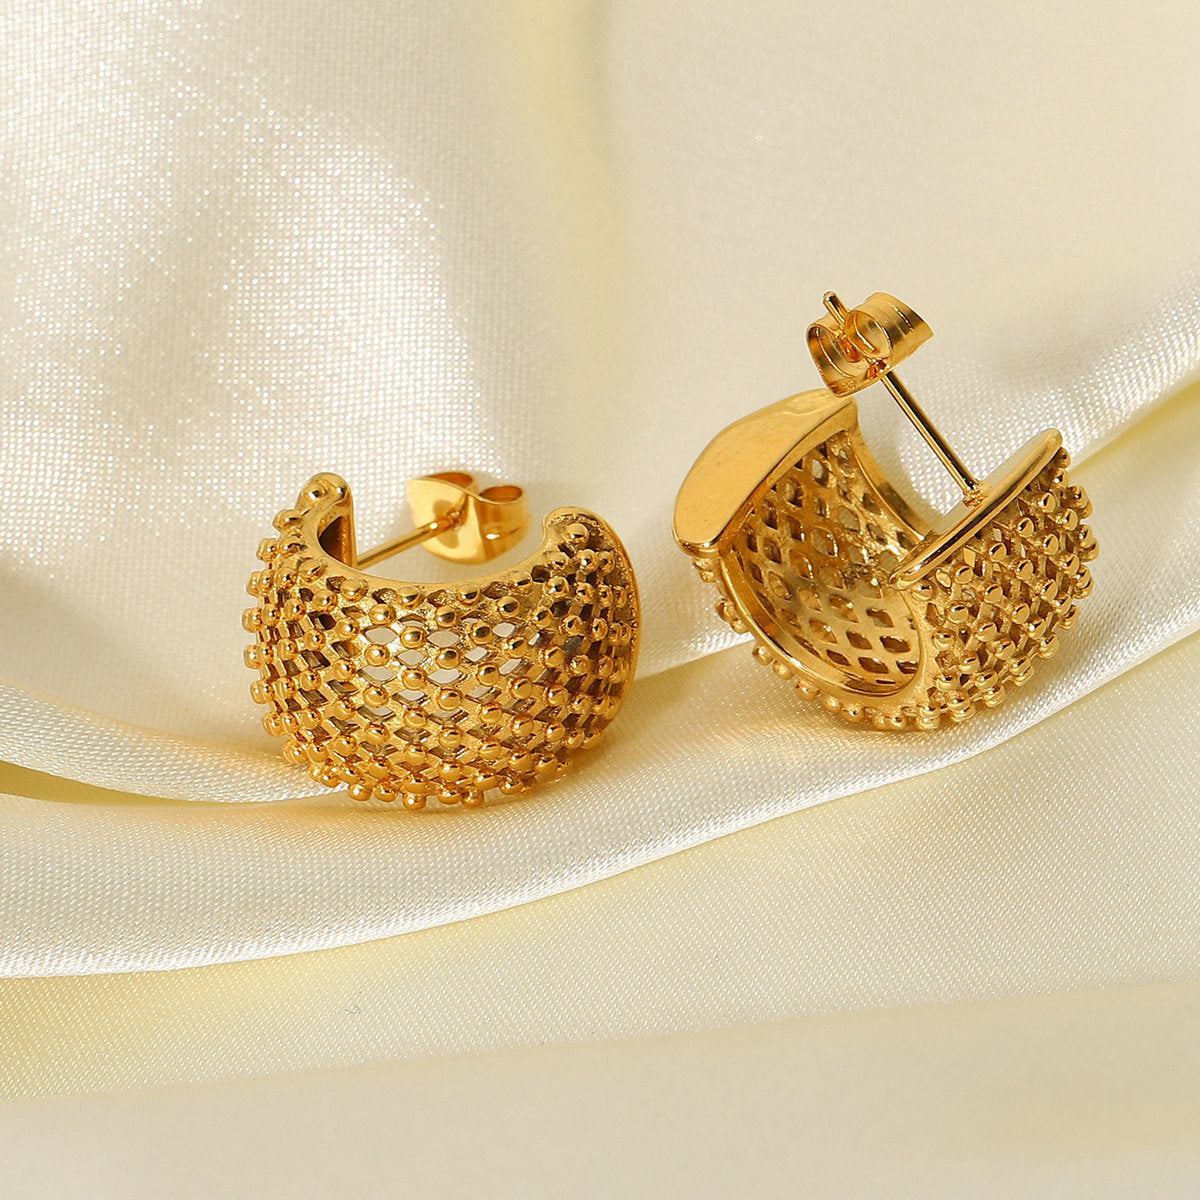 Chic Grid Gold Nugget Earrings 18k Gold-plated nugget earrings